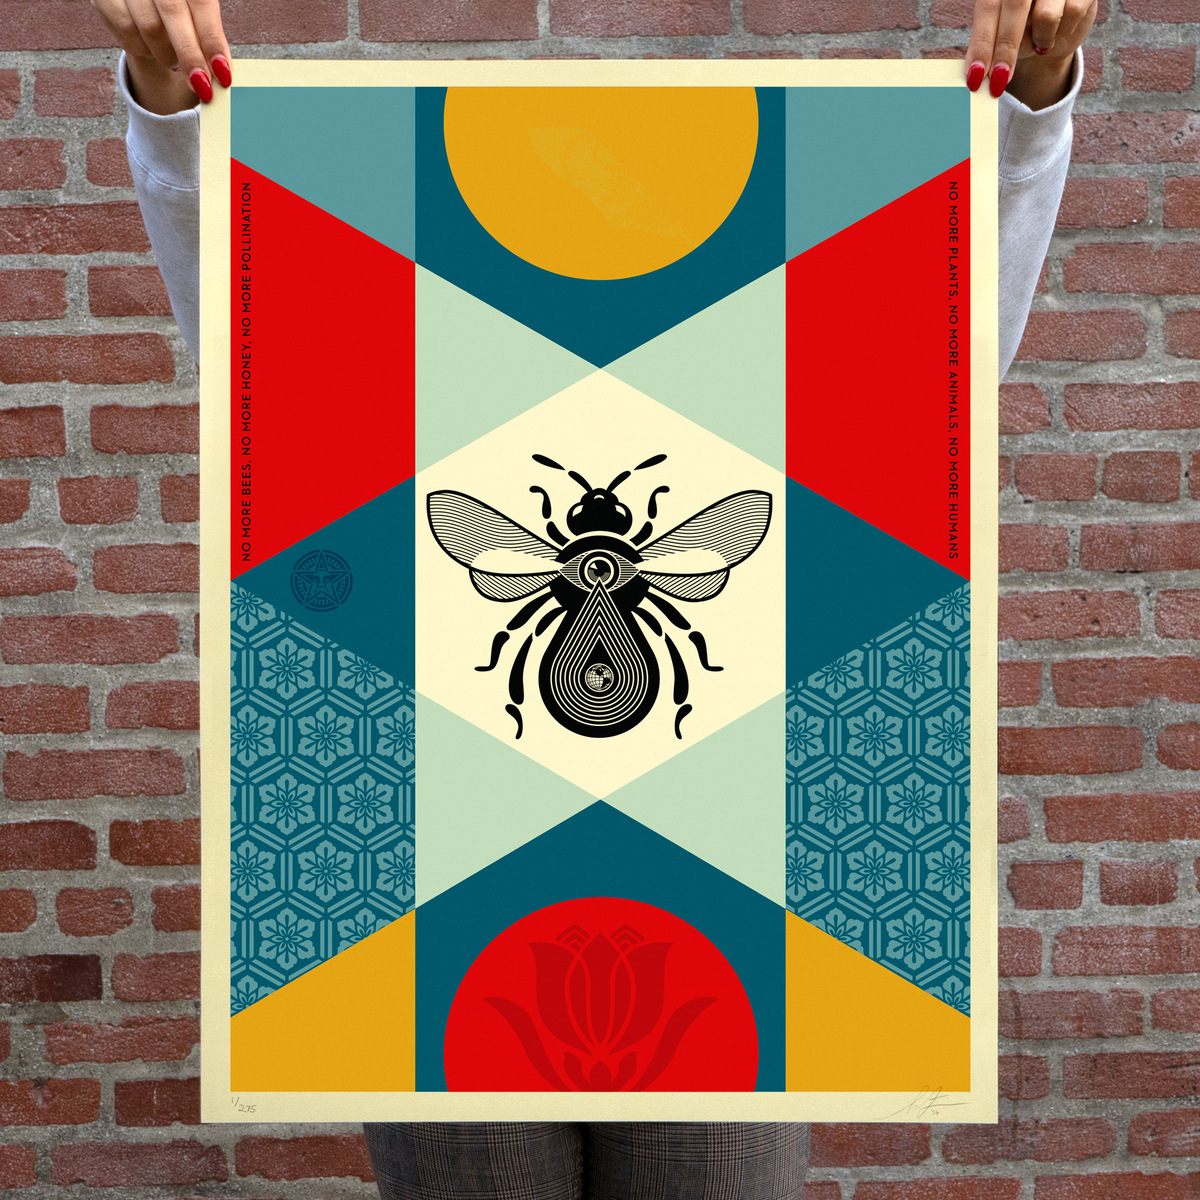 NEW Print Release: 'Bee Geometric' Available Thursday, May 23rd @ 10 AM PT Today is World Bee Day. These “Bee Geometric” prints remind us how much our planet depends on bees as pollinators. Bees and other pollinators, such as butterflies, bats, and hummingbirds, are